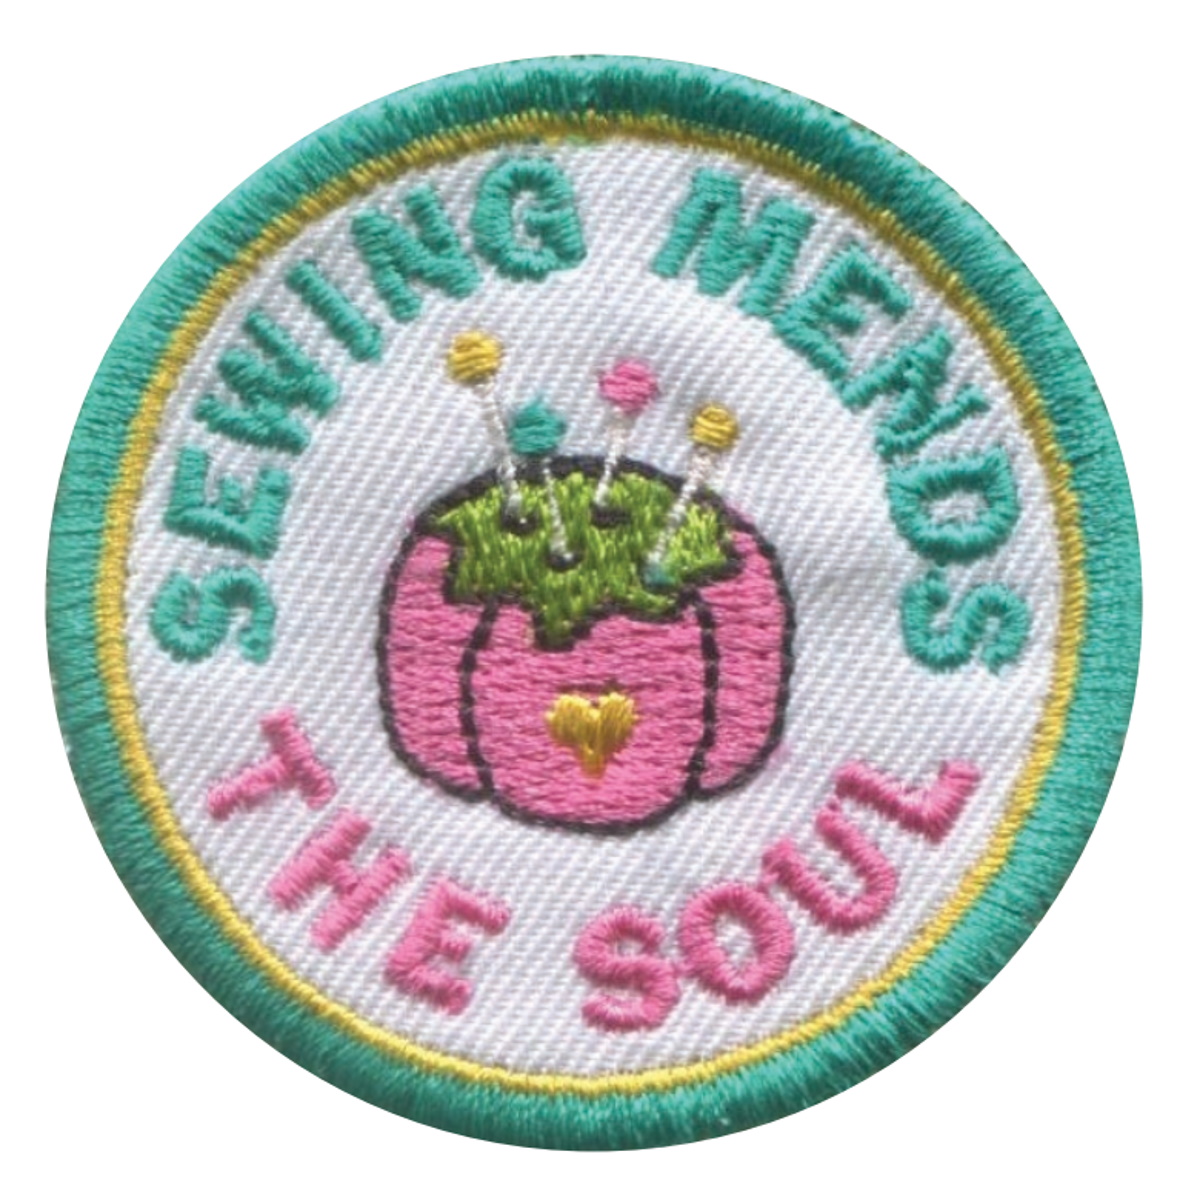 Stickdesign Sewist Patches: SEWING MENDS THE SOUL (Download)